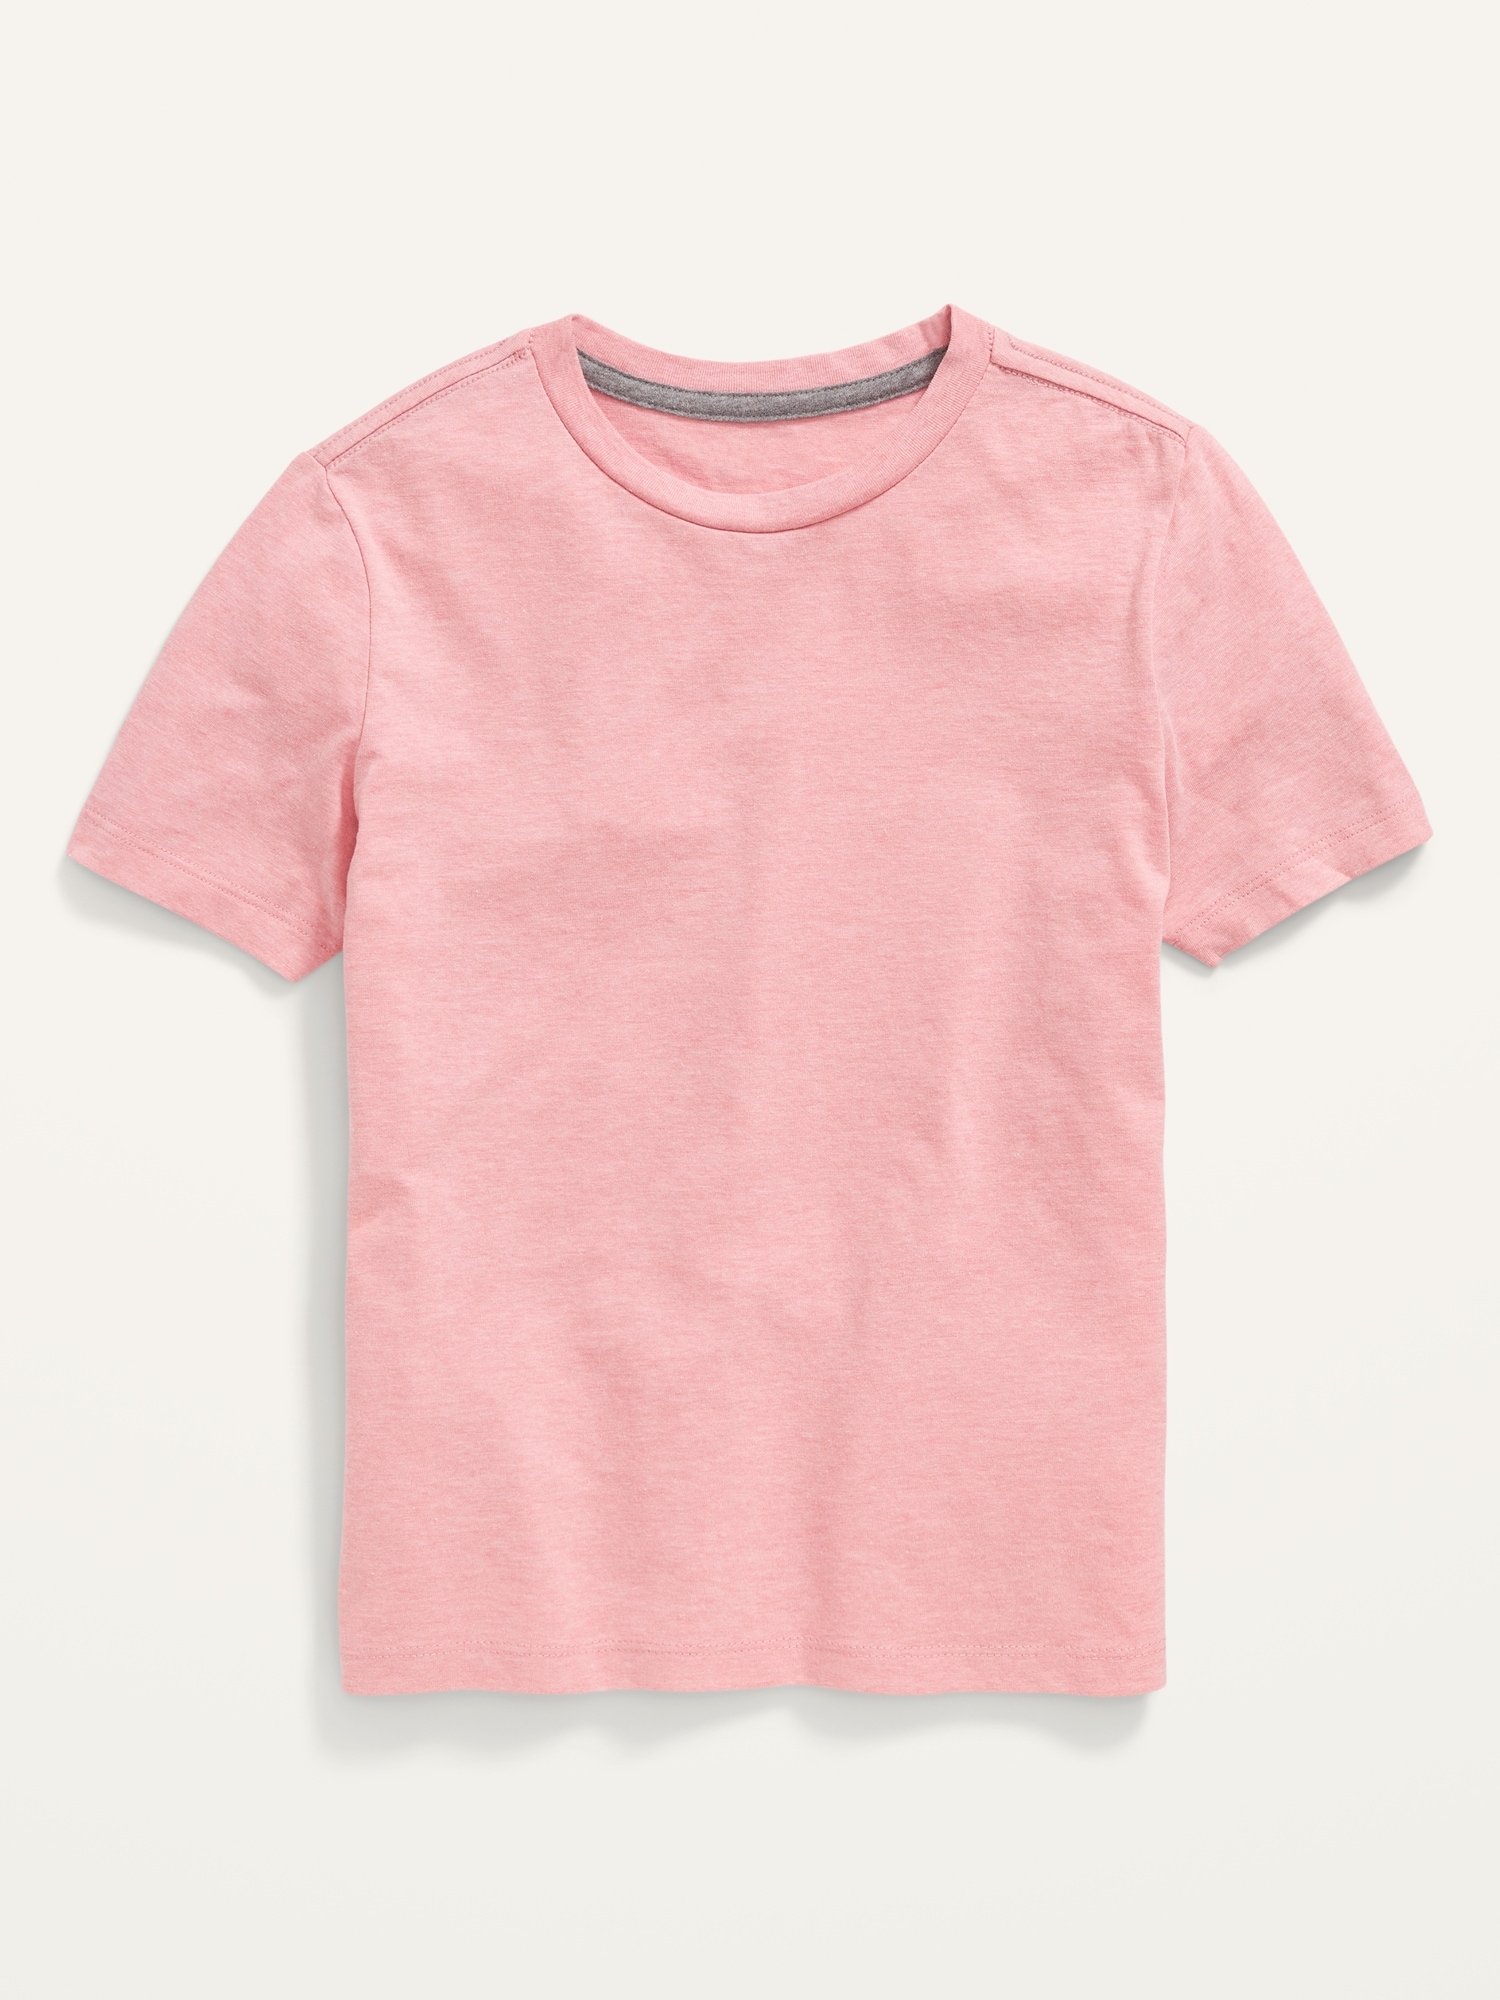 Softest Crew-Neck T-Shirt for Boys Old Navy photo